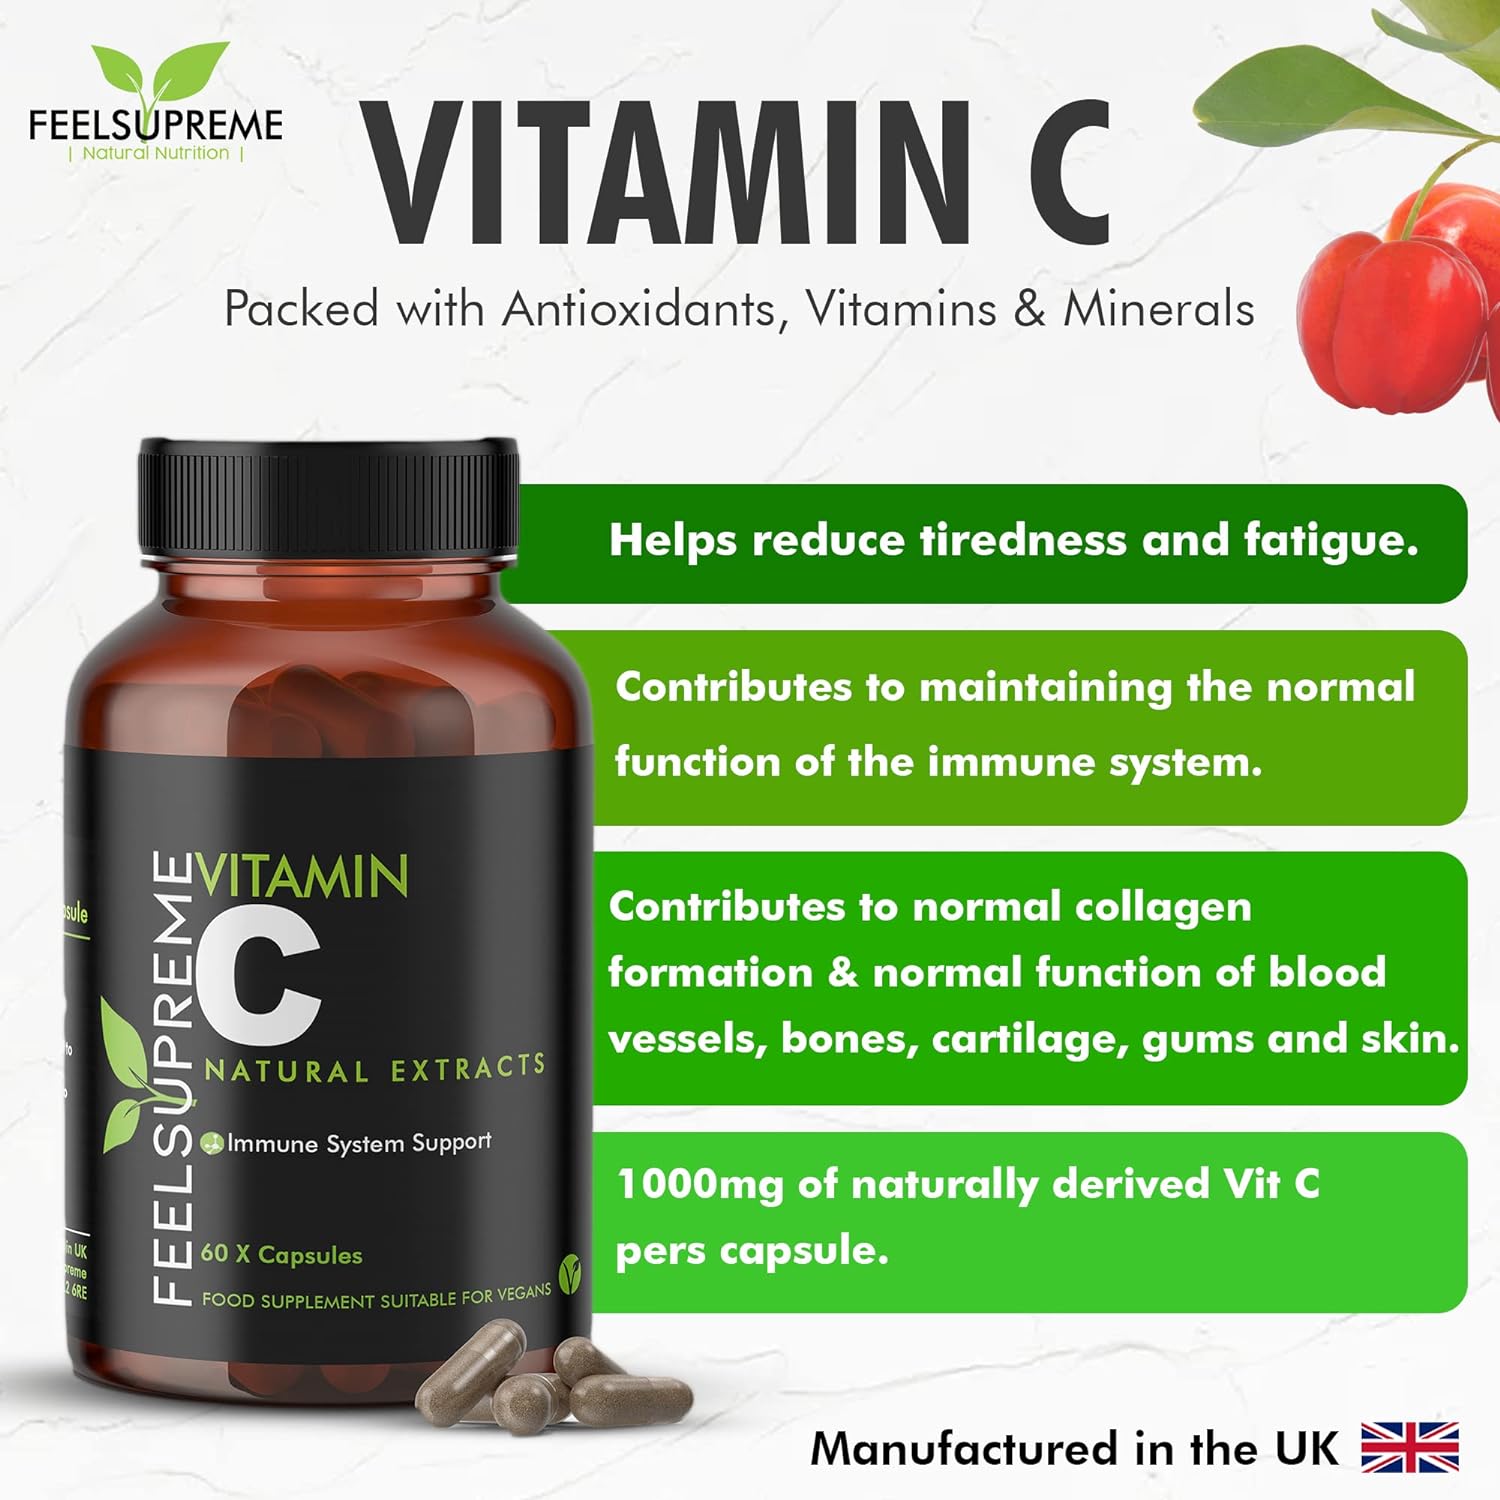 100% Natural Vitamin C 60 High Strength Food State Non-Synthetic Capsules Supplement Immune System Support No Nasty Fillers or Binders